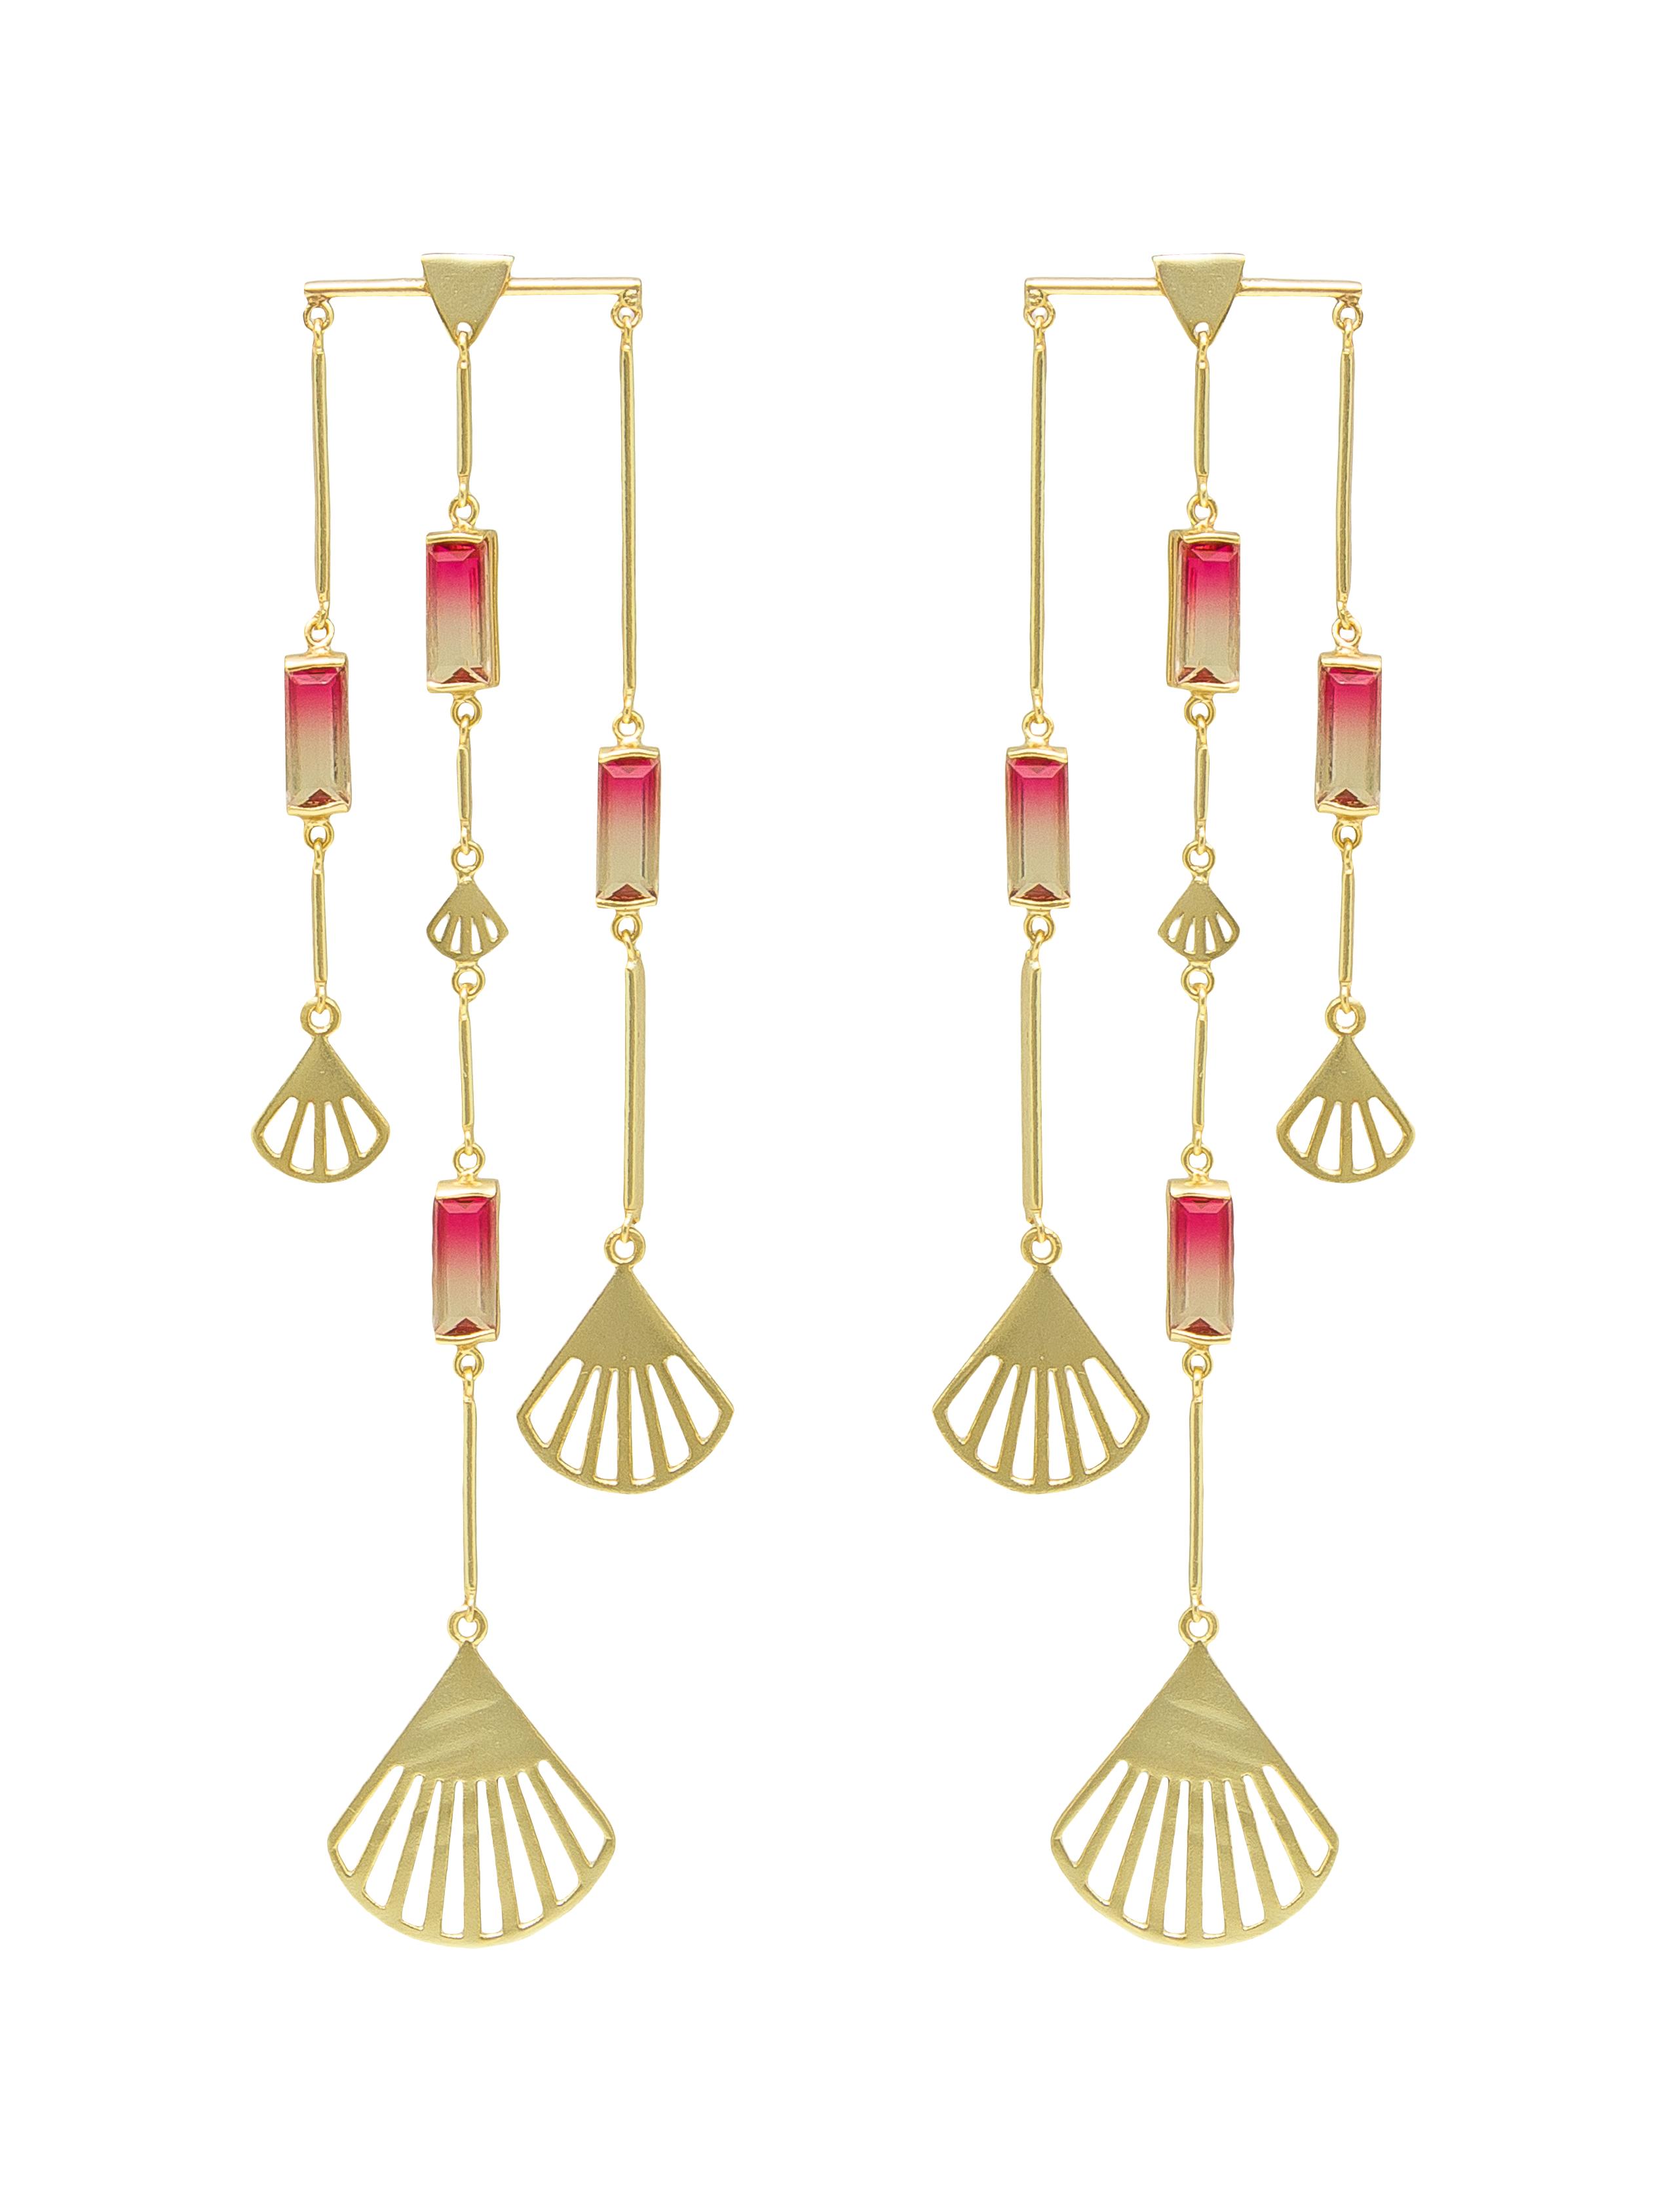 MELON DEW CHANDELIER EARRING, a product by Antarez